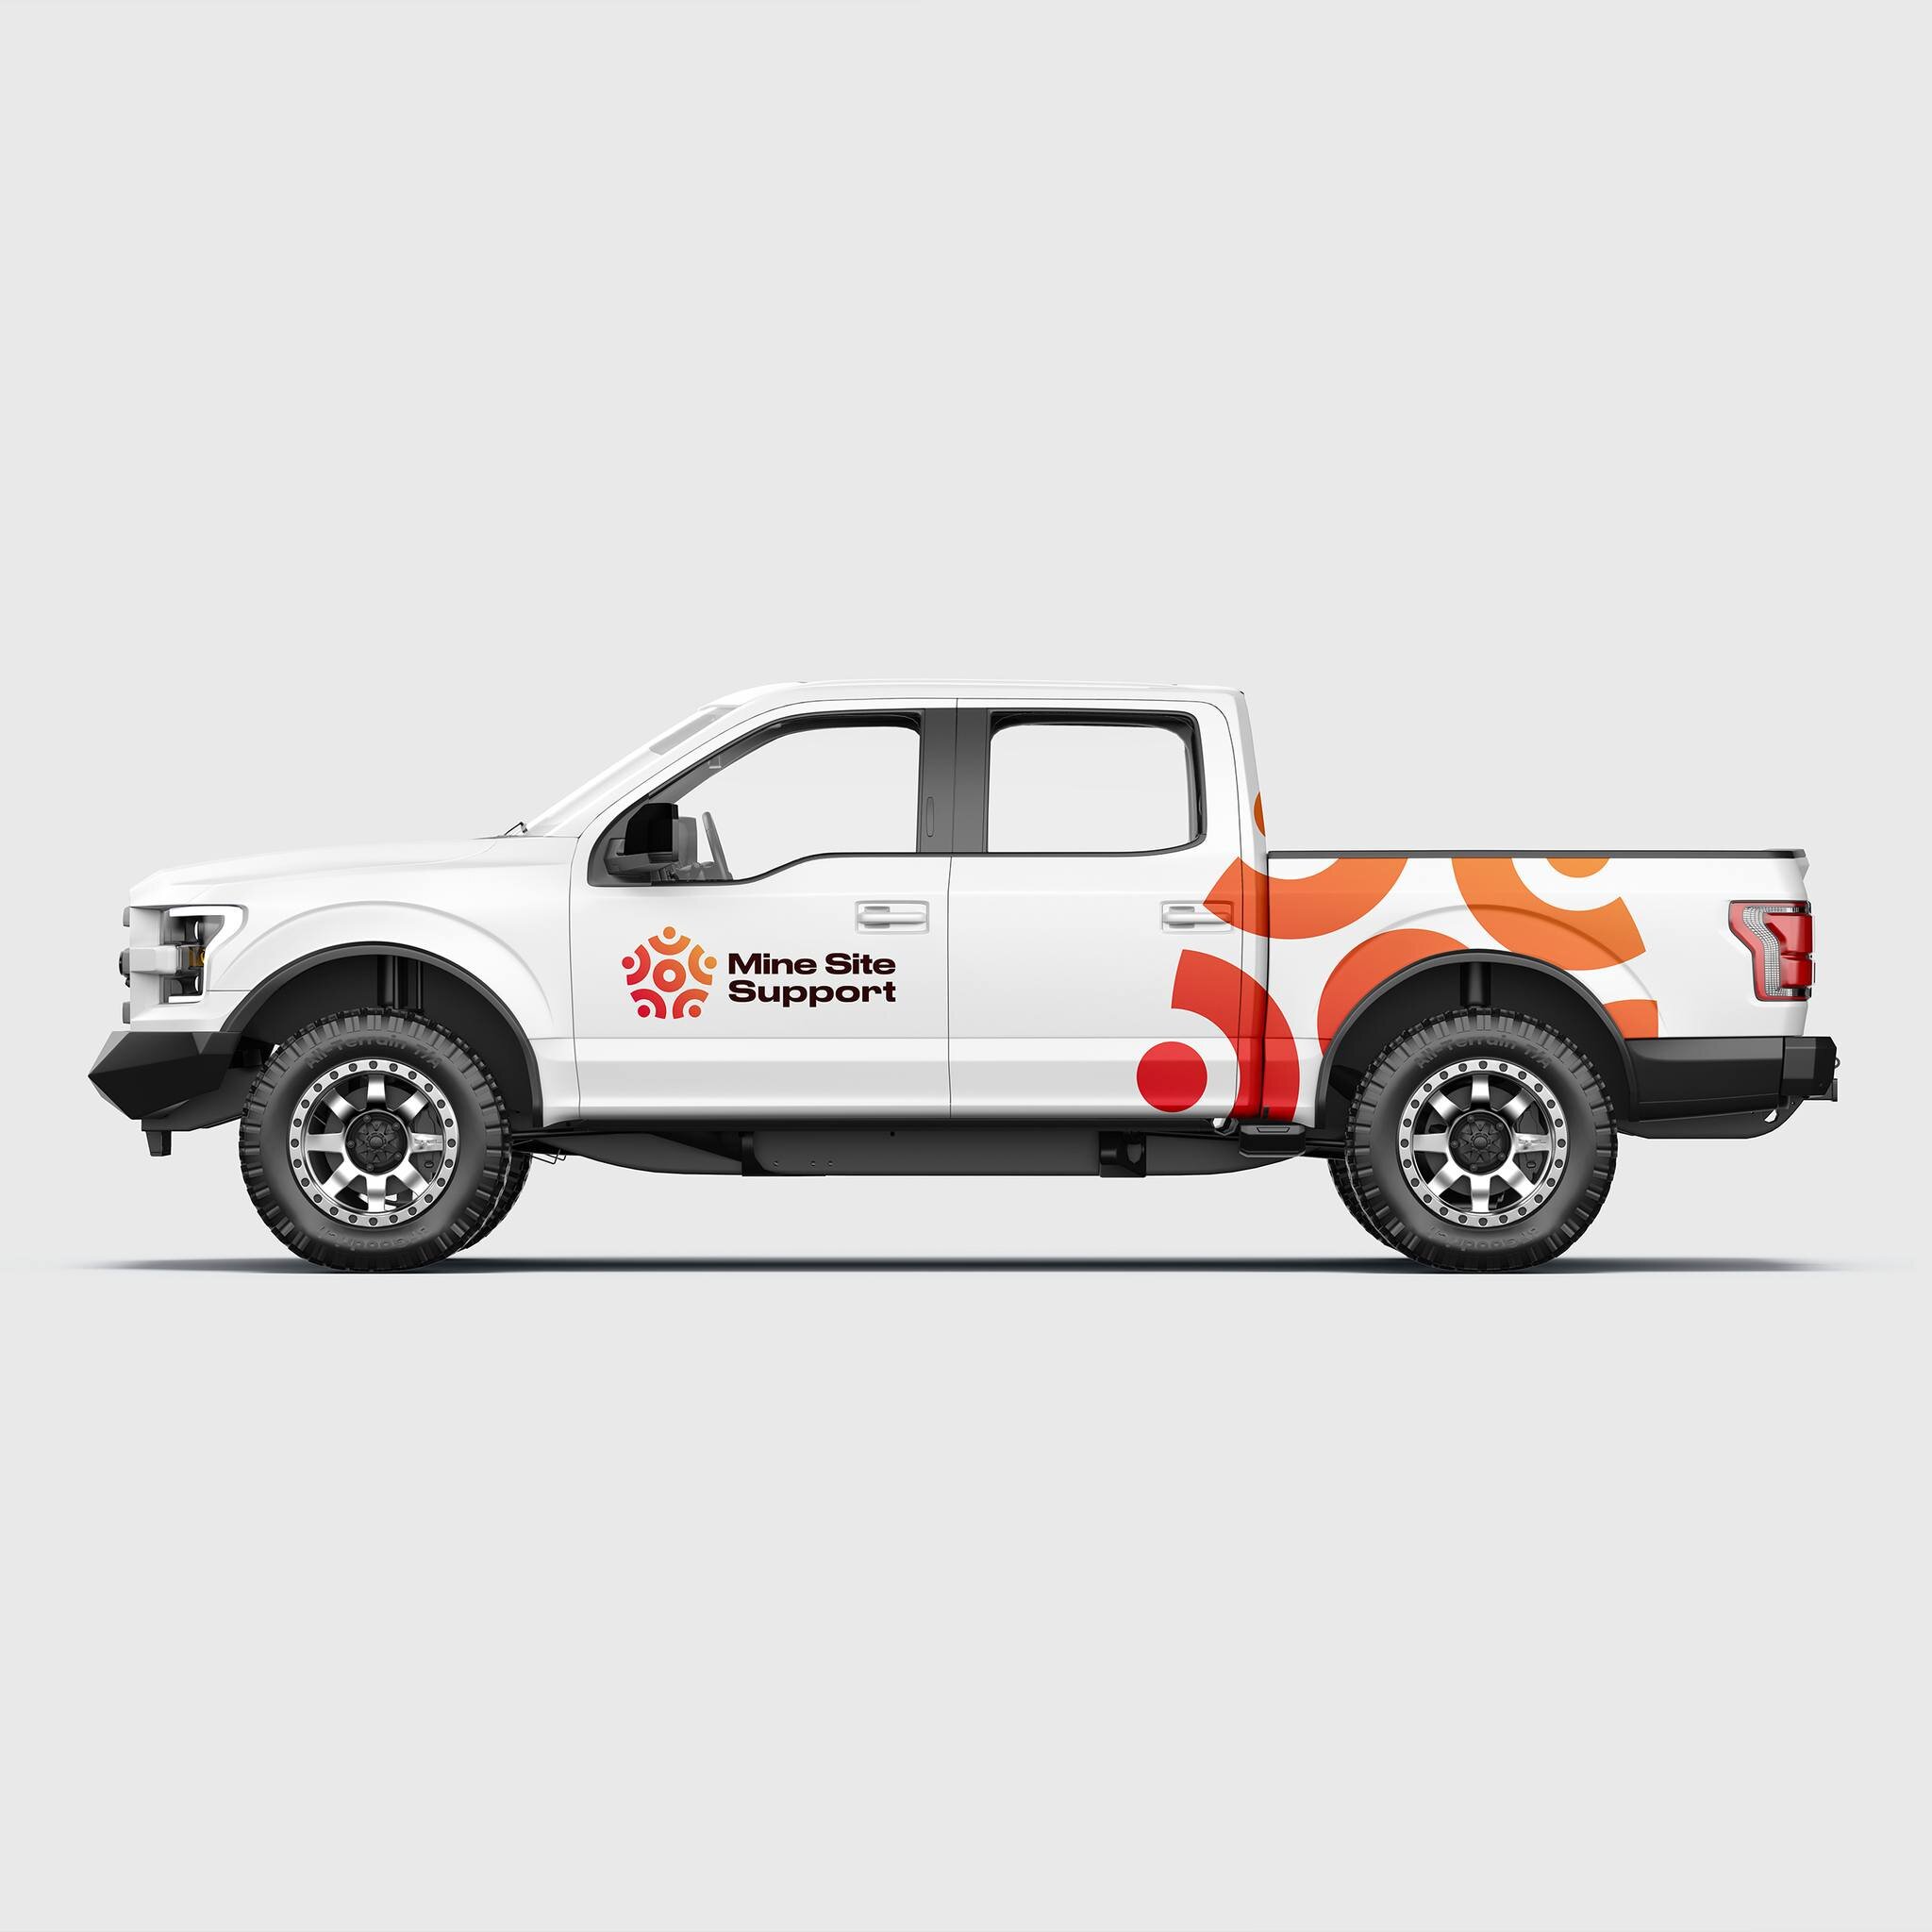 Vehicle signage mockup designed for Mine Site Support, an indigenous-owned and operated business providing safety and operational services for tier 1 mining companies and contractors in West Australia.
&bull;
&bull;
&bull;
&bull;
#branding #graphicde